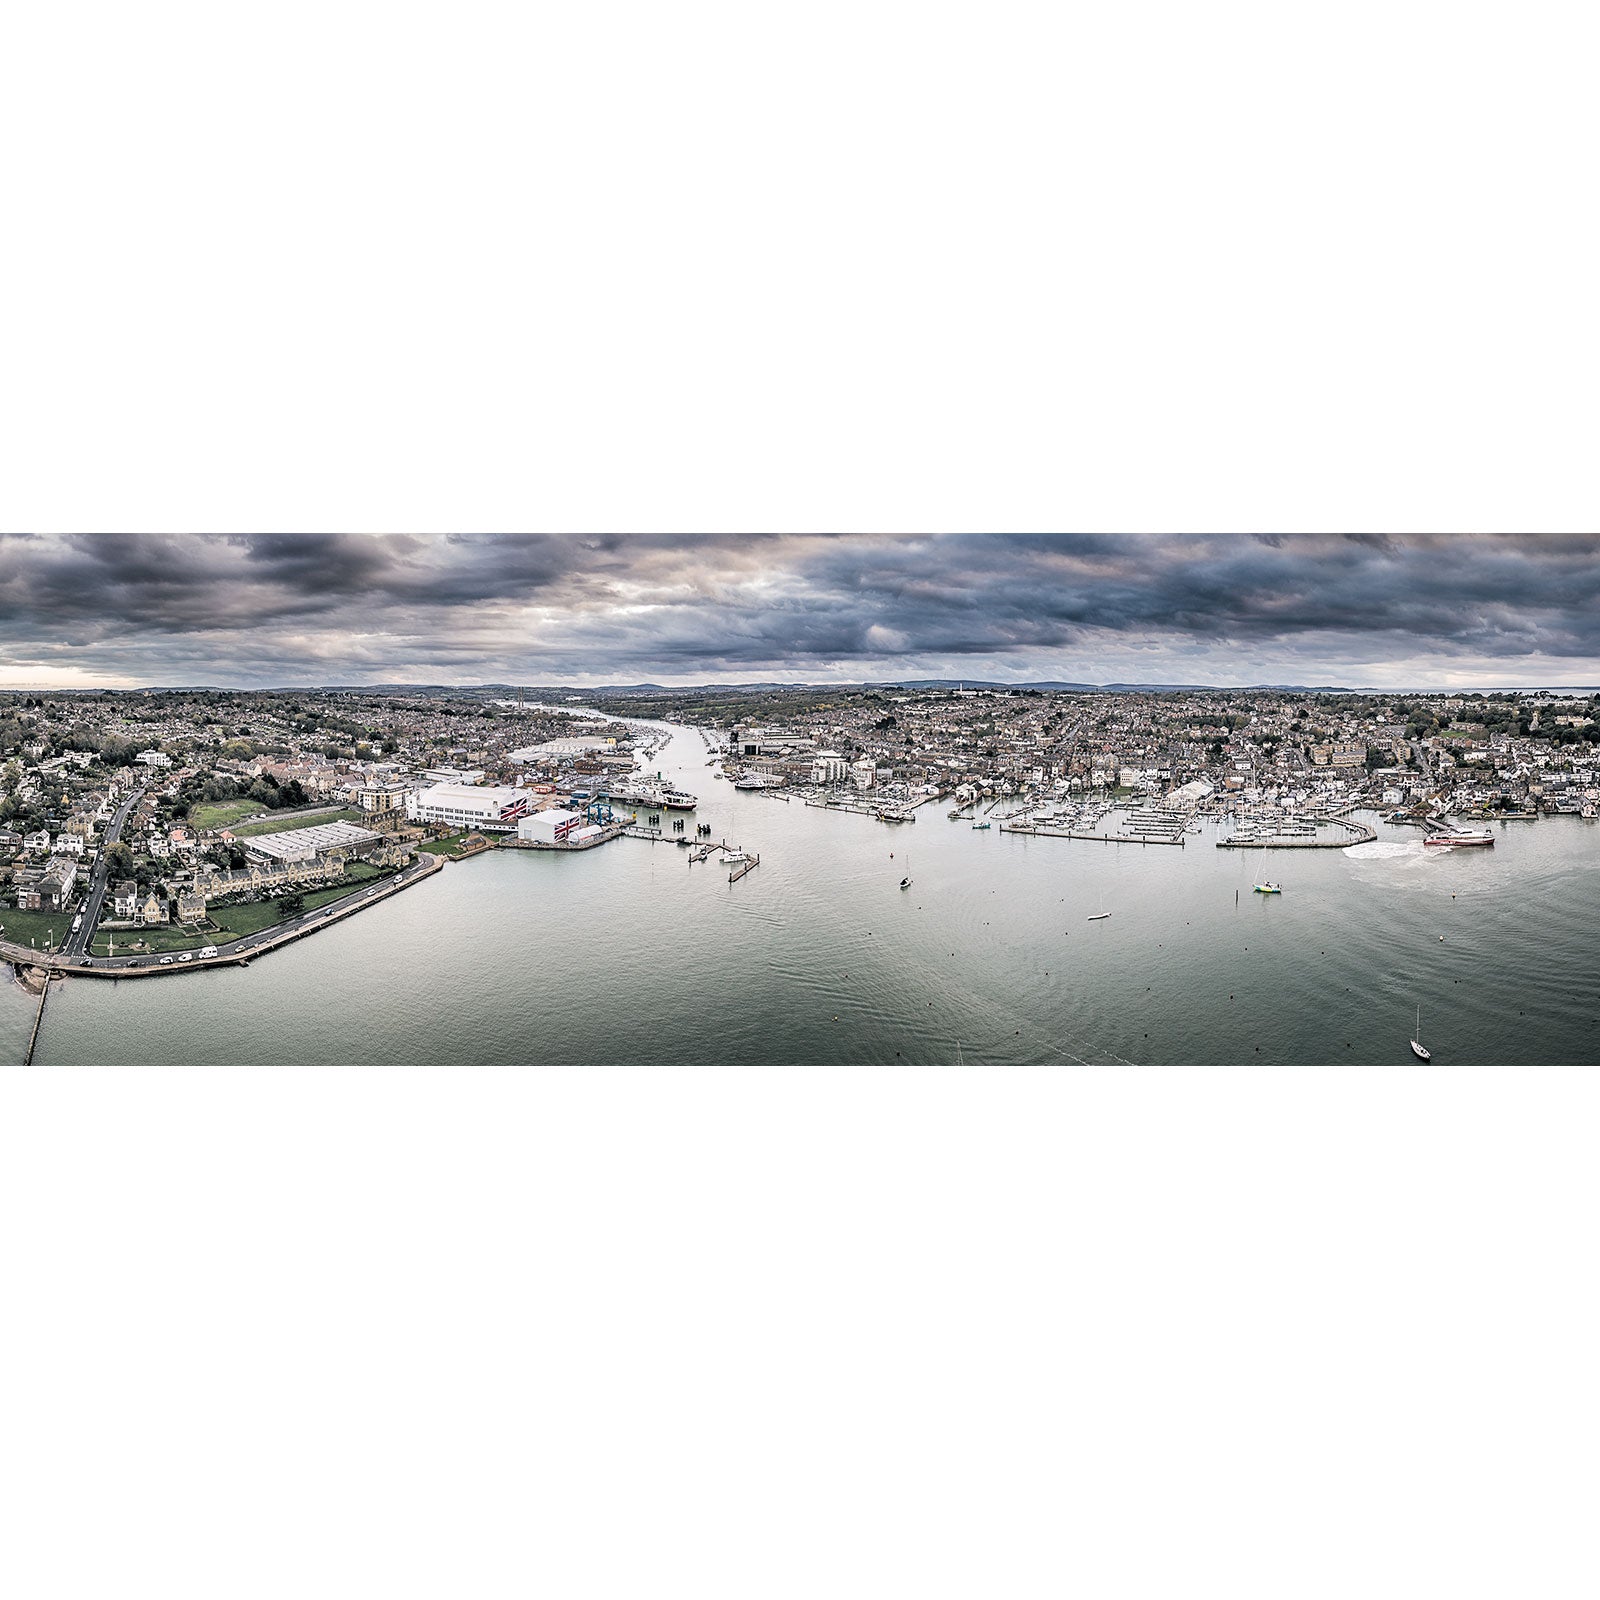 A panoramic aerial view of Cowes and East Cowes on the Isle of Wight with a harbor, boats, and surrounding residential areas under a cloudy sky by Available Light Photography.